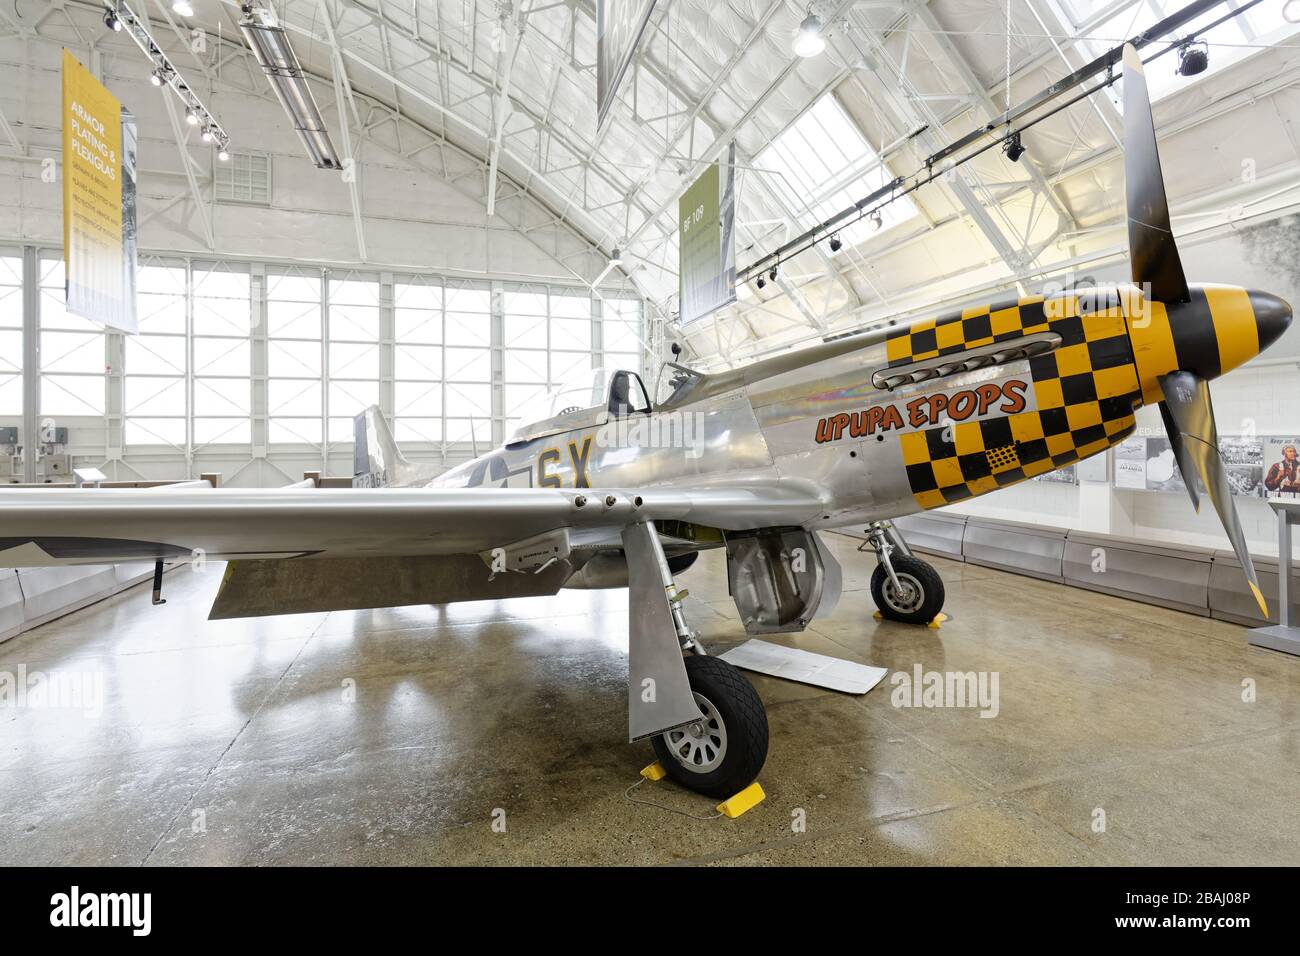 SEPTEMBER 19, 2015, EVERETT, WA: A fully airworthy North American P-51D Mustang on display at a Seattle-area Museum. Stock Photo